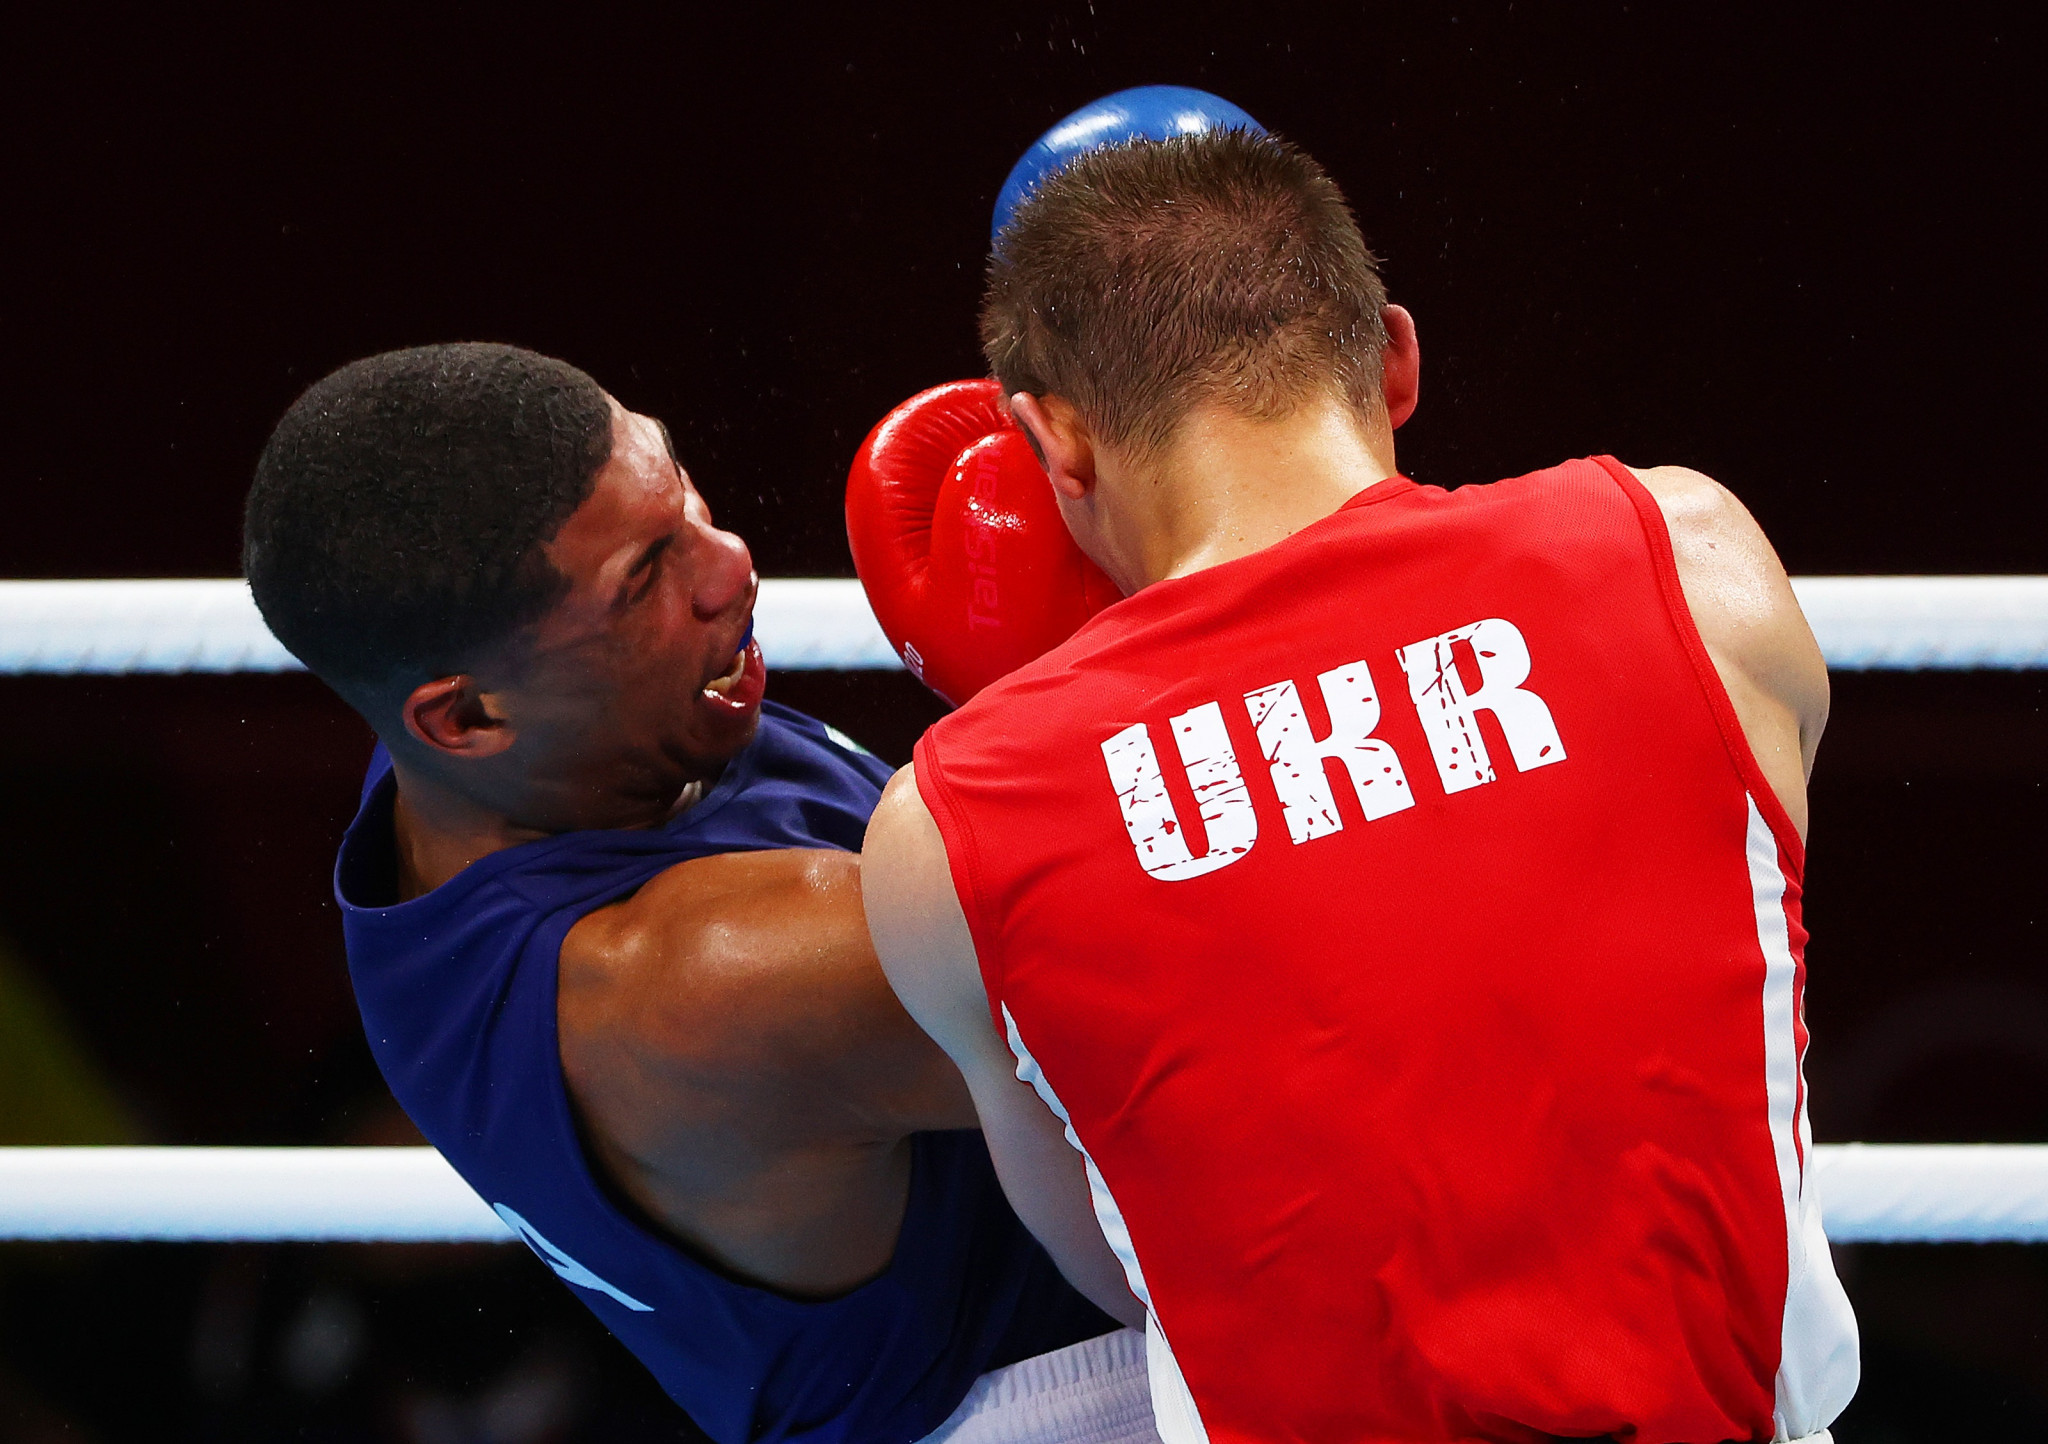 Ukraine boycott IBA World Championships due to participation of "aggressor countries"